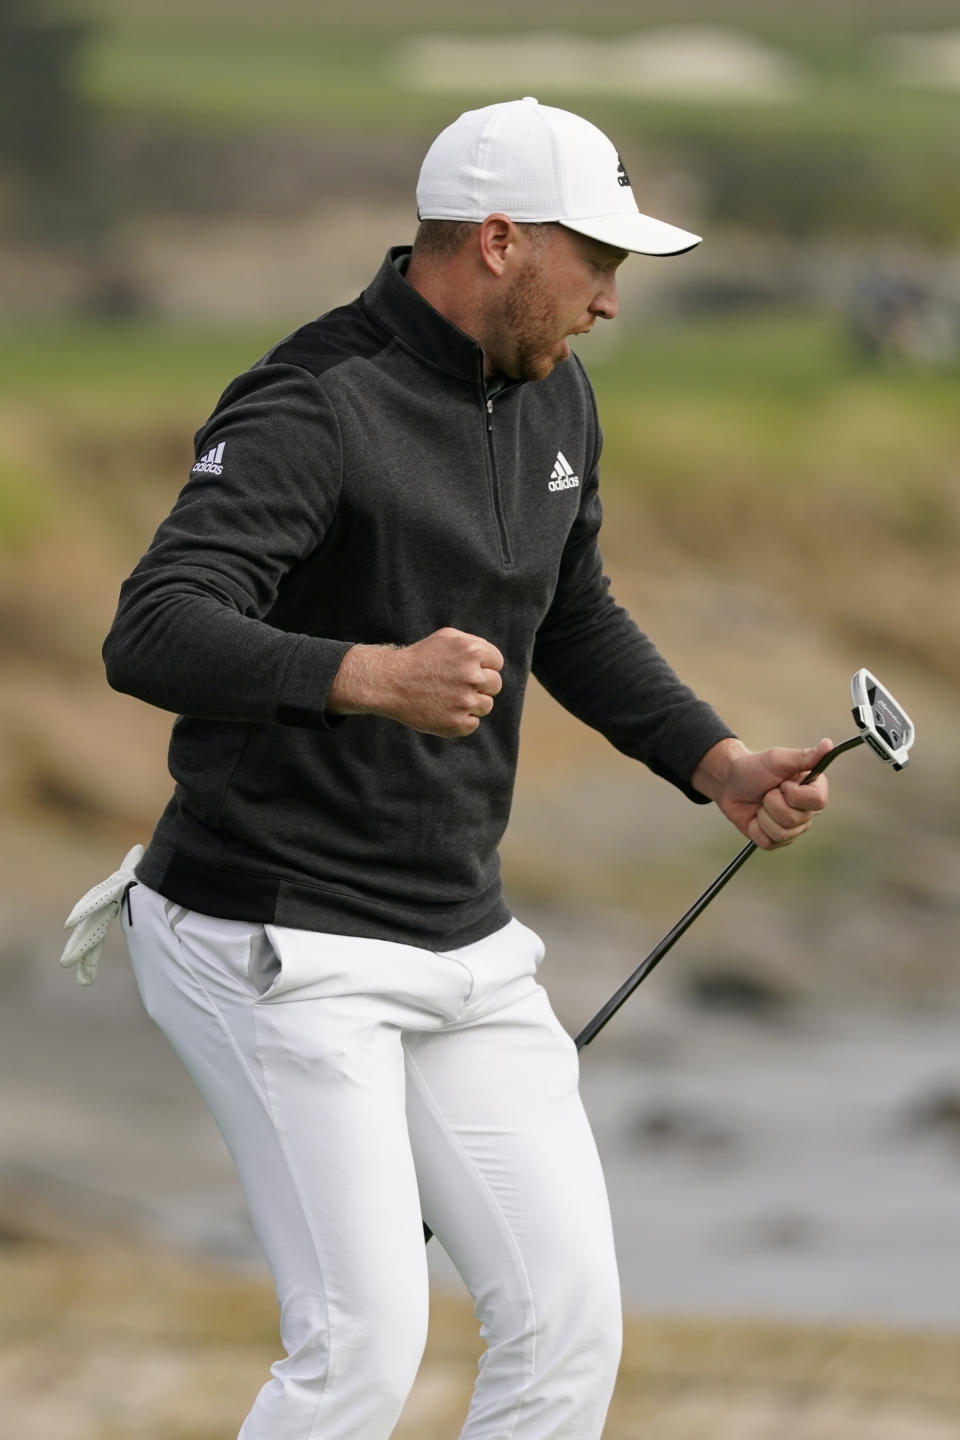 Daniel Berger reacts after making an eagle putt on the 18th green of the Pebble Beach Golf Links during the final round of the AT&T Pebble Beach Pro-Am golf tournament Sunday, Feb. 14, 2021, in Pebble Beach, Calif. Berger won the tournament. (AP Photo/Eric Risberg)